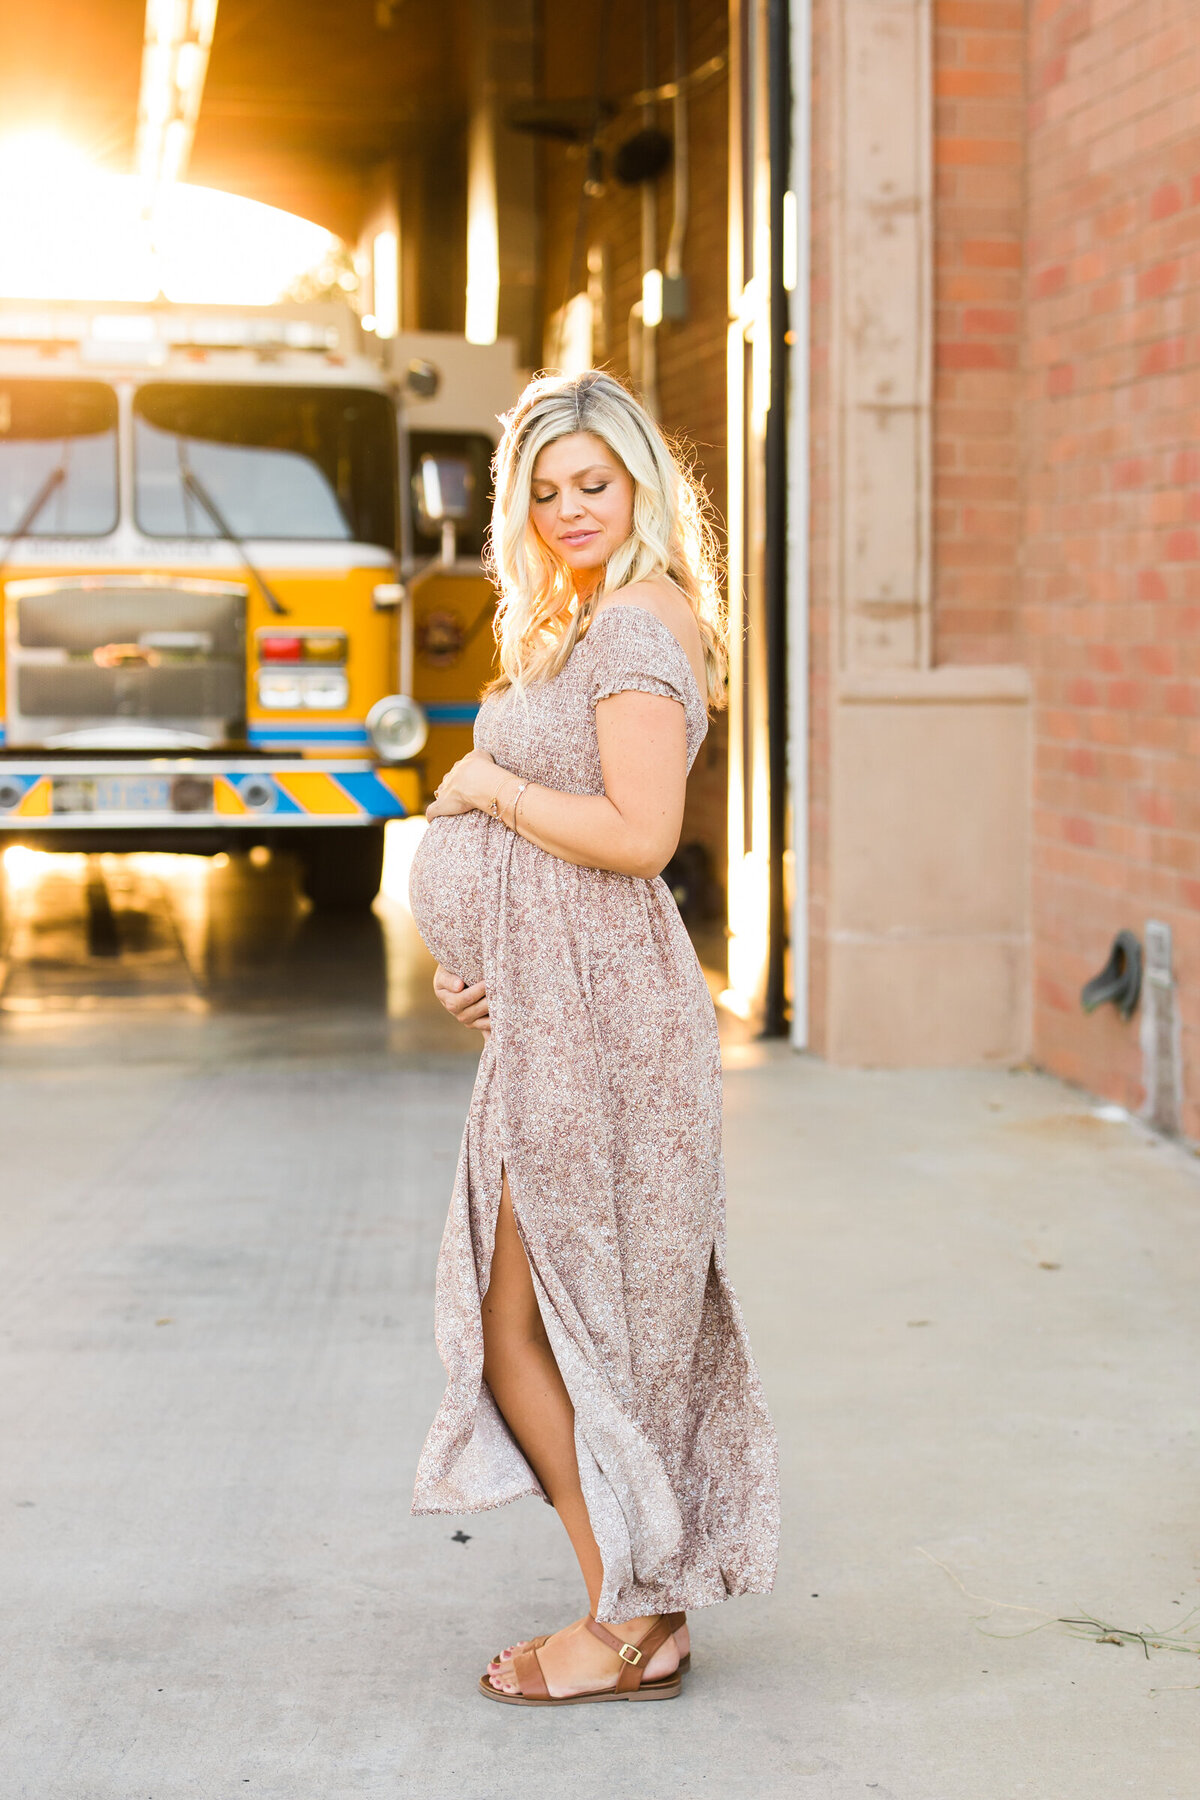 pregnant woman holding baby bump for maternity photography session at fire station